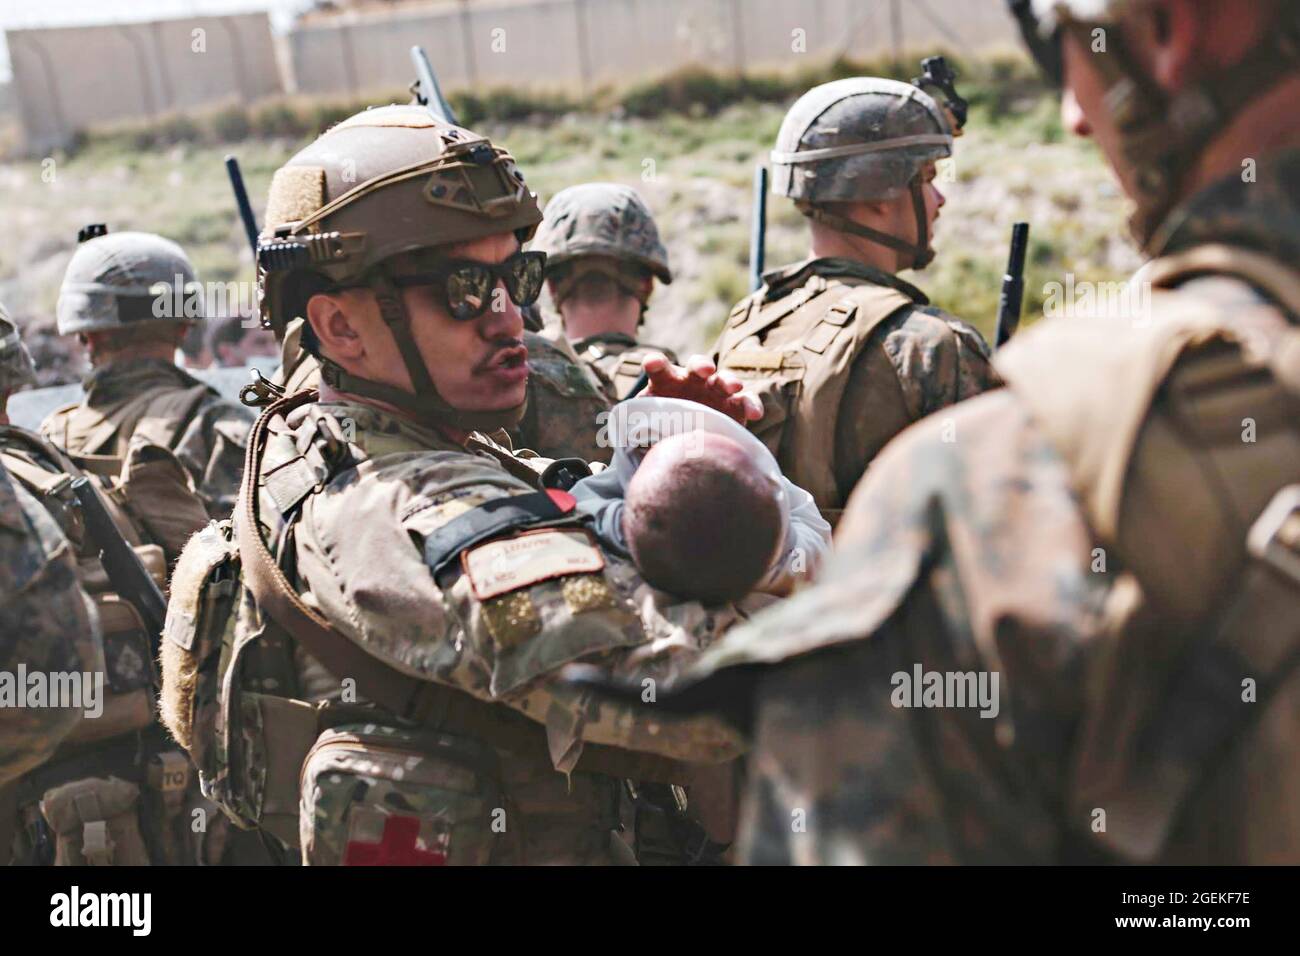 Kabul, Afghanistan. 20th Aug, 2021. A U.S. soldier comforts an infant as he is taken to safety during the evacuation of non-combatants at Hamid Karzai International Airport, part of Operation Allies Refuge August 20, 2021 in Kabul, Afghanistan. Credit: Planetpix/Alamy Live News Stock Photo